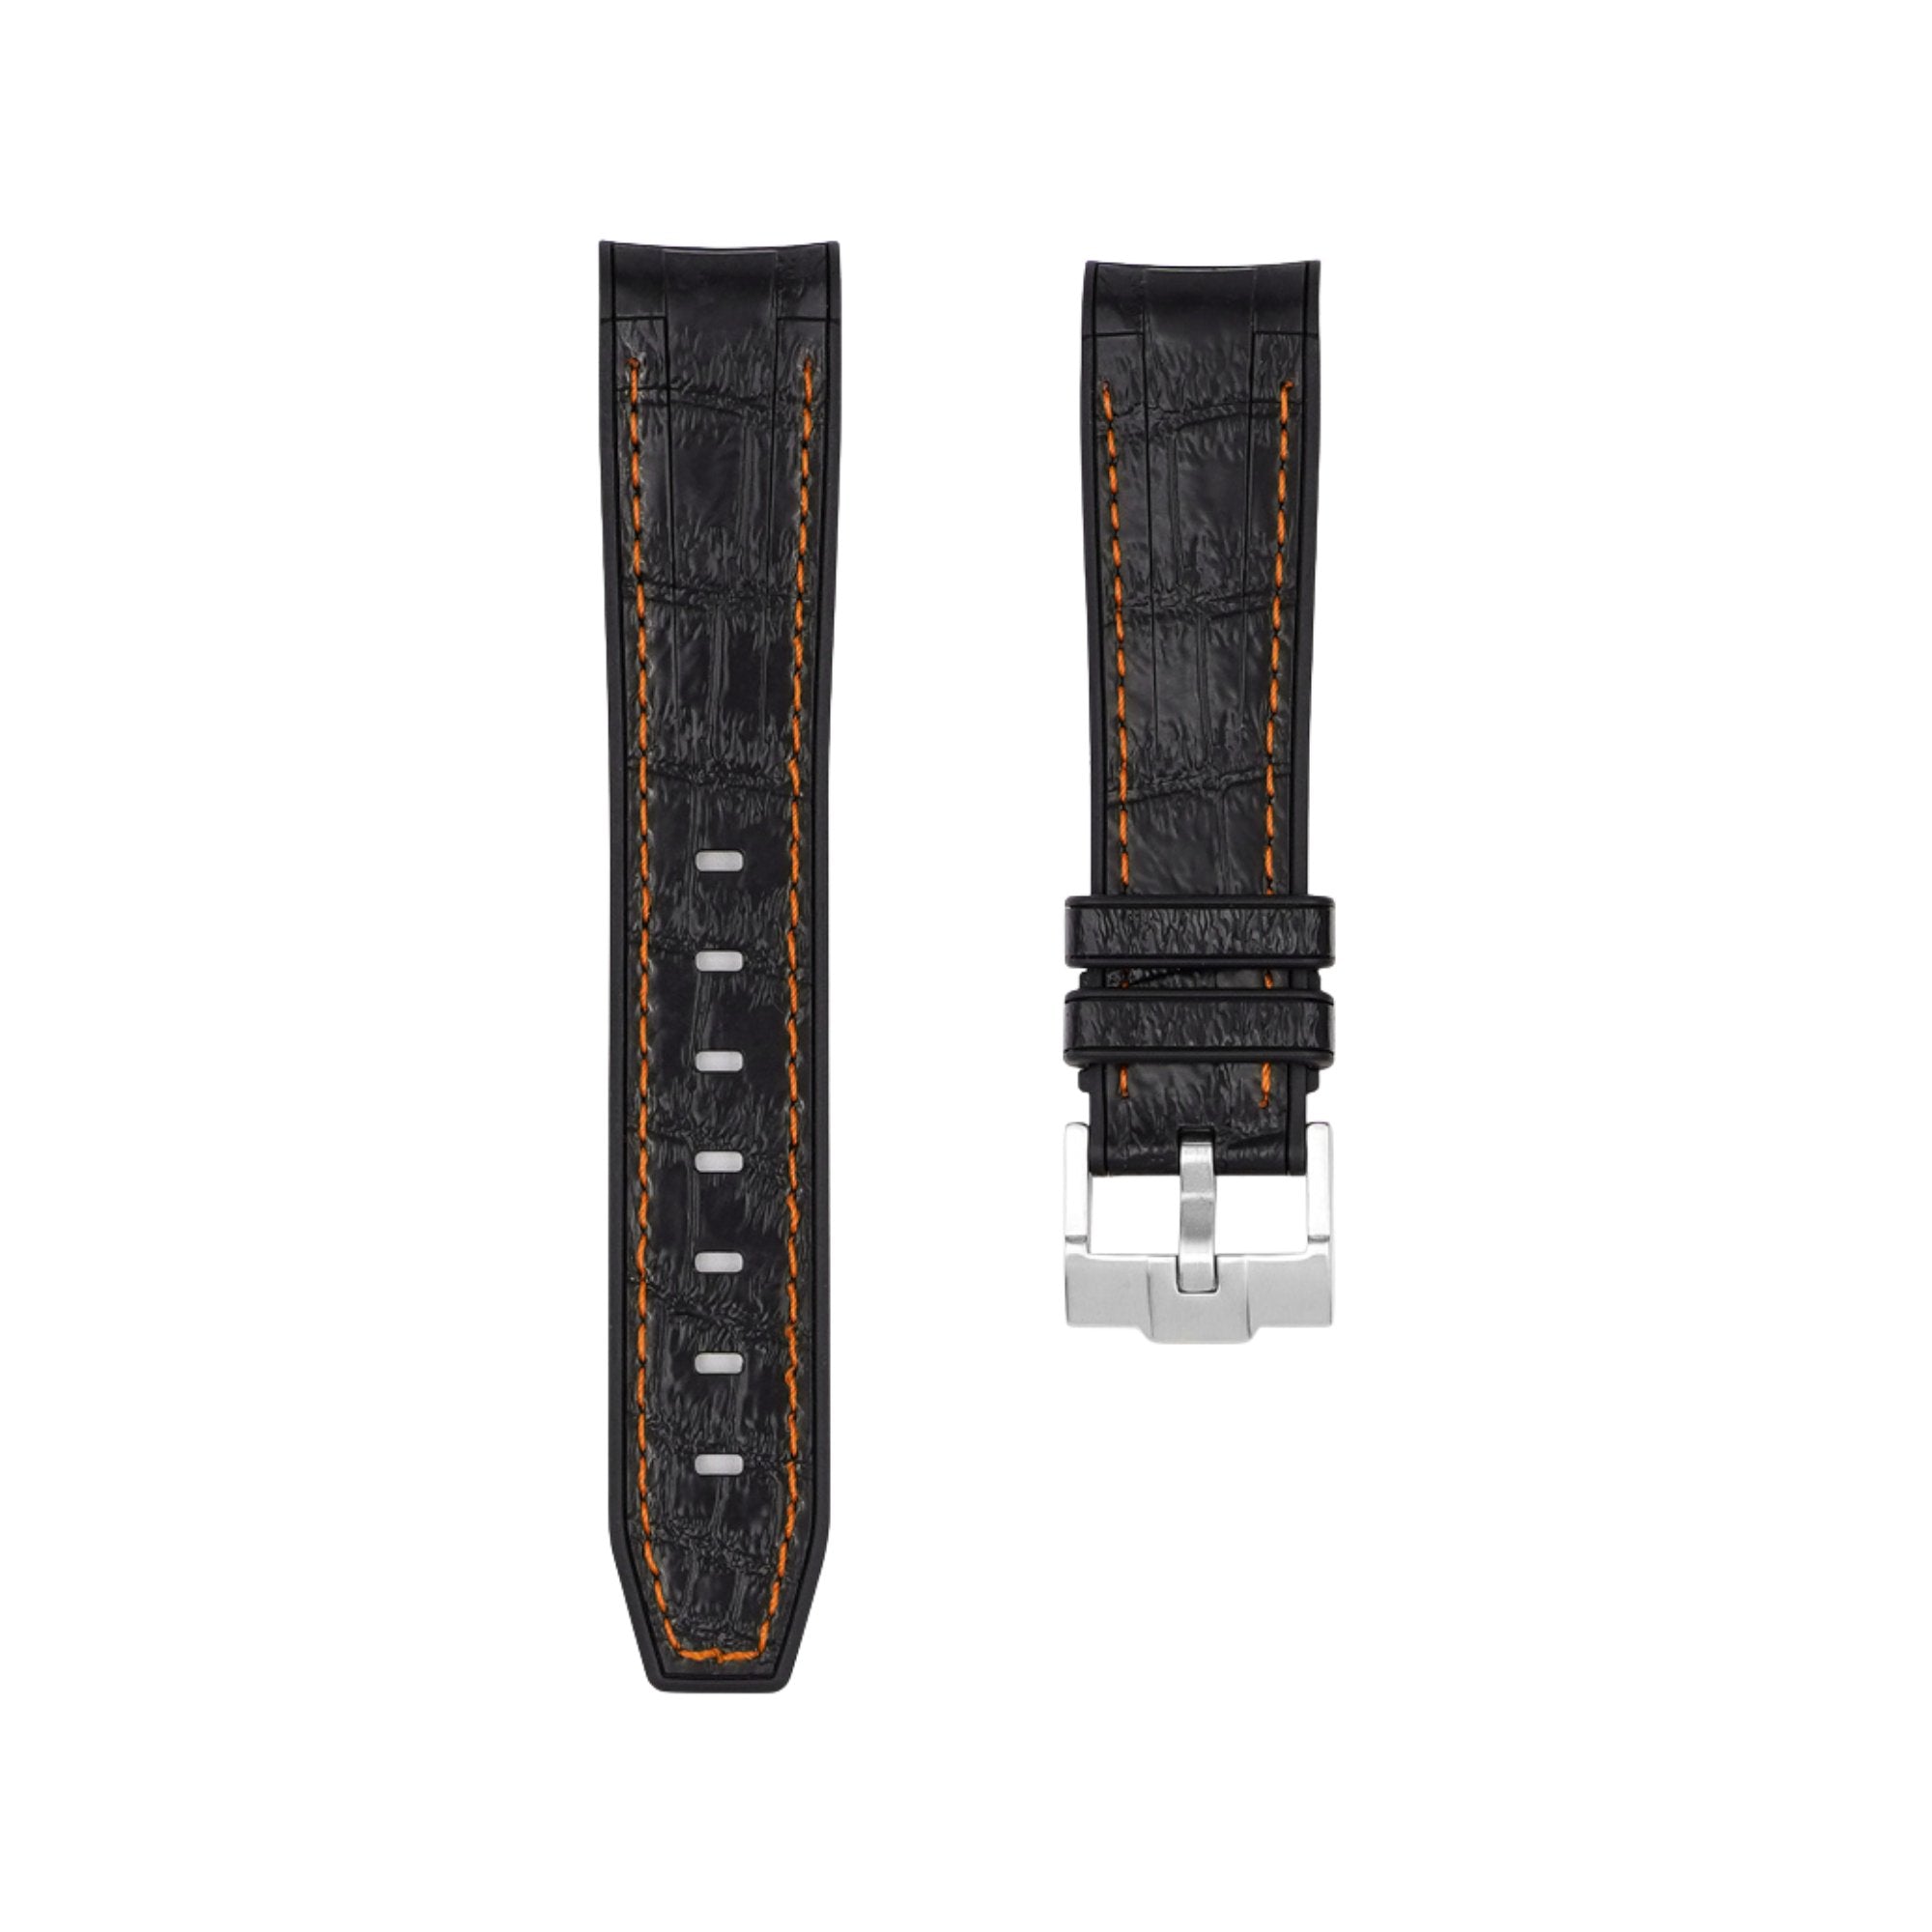 Alligator Embossed Curved End Premium Silicone Strap - Compatible with Omega Moonwatch - Black with Orange Stitch (2406) -StrapSeeker